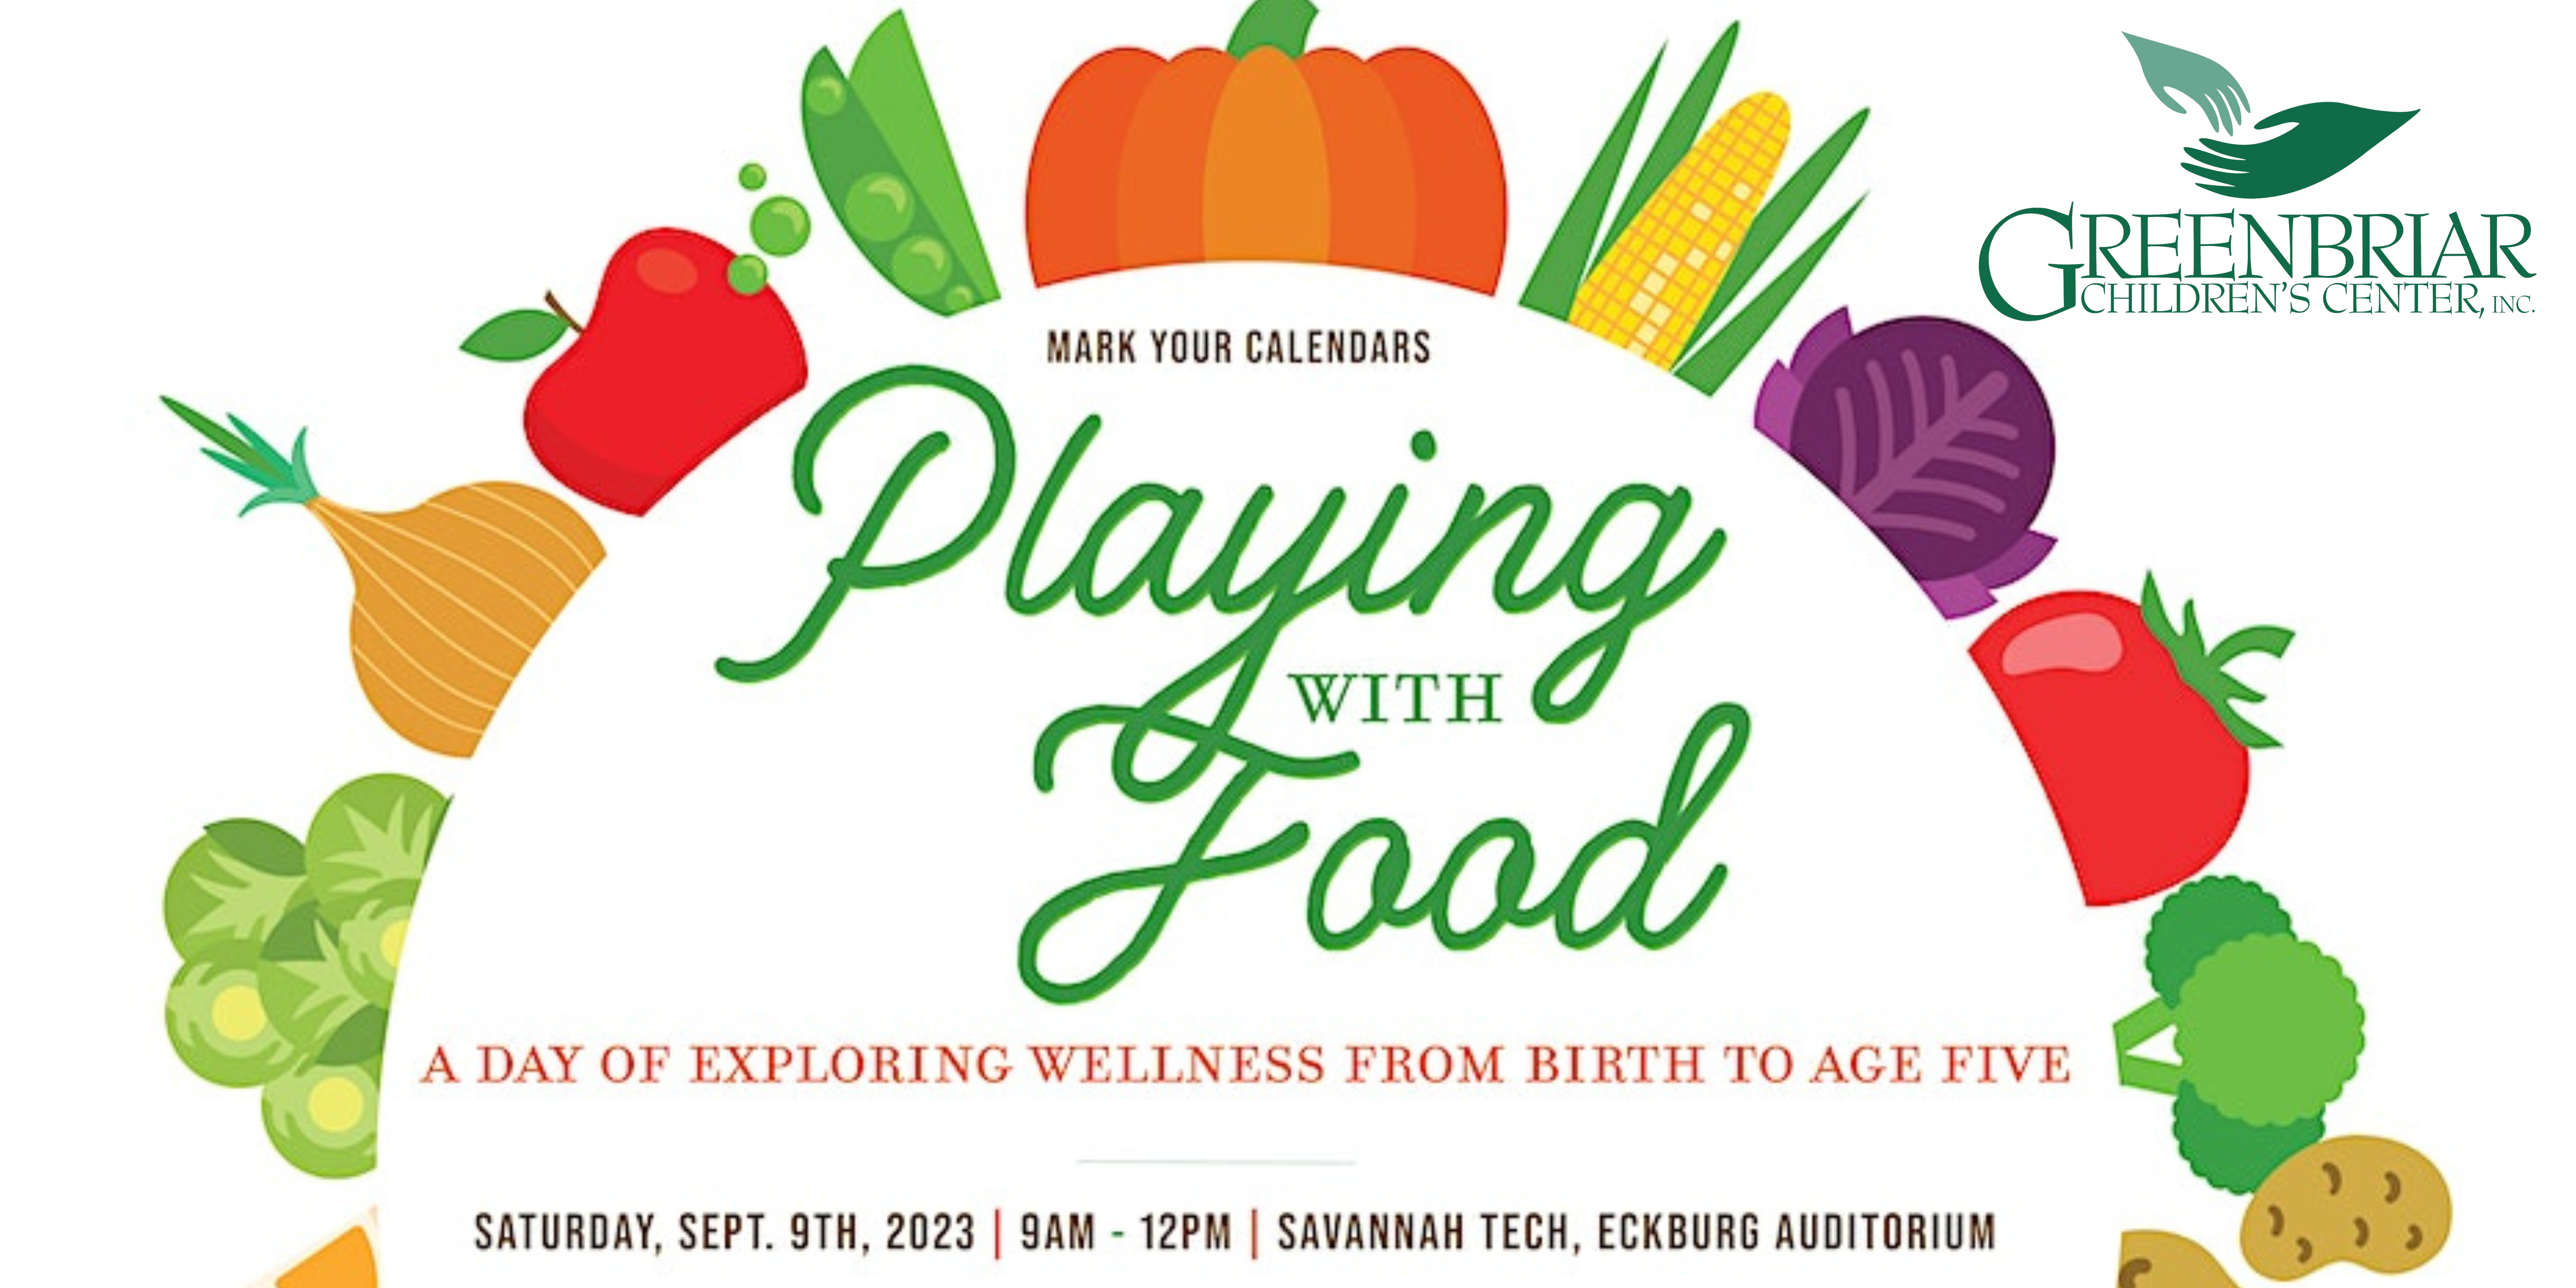 Greenbriar Childrens Center Hosts Community Nutrition Event, Playing with Food